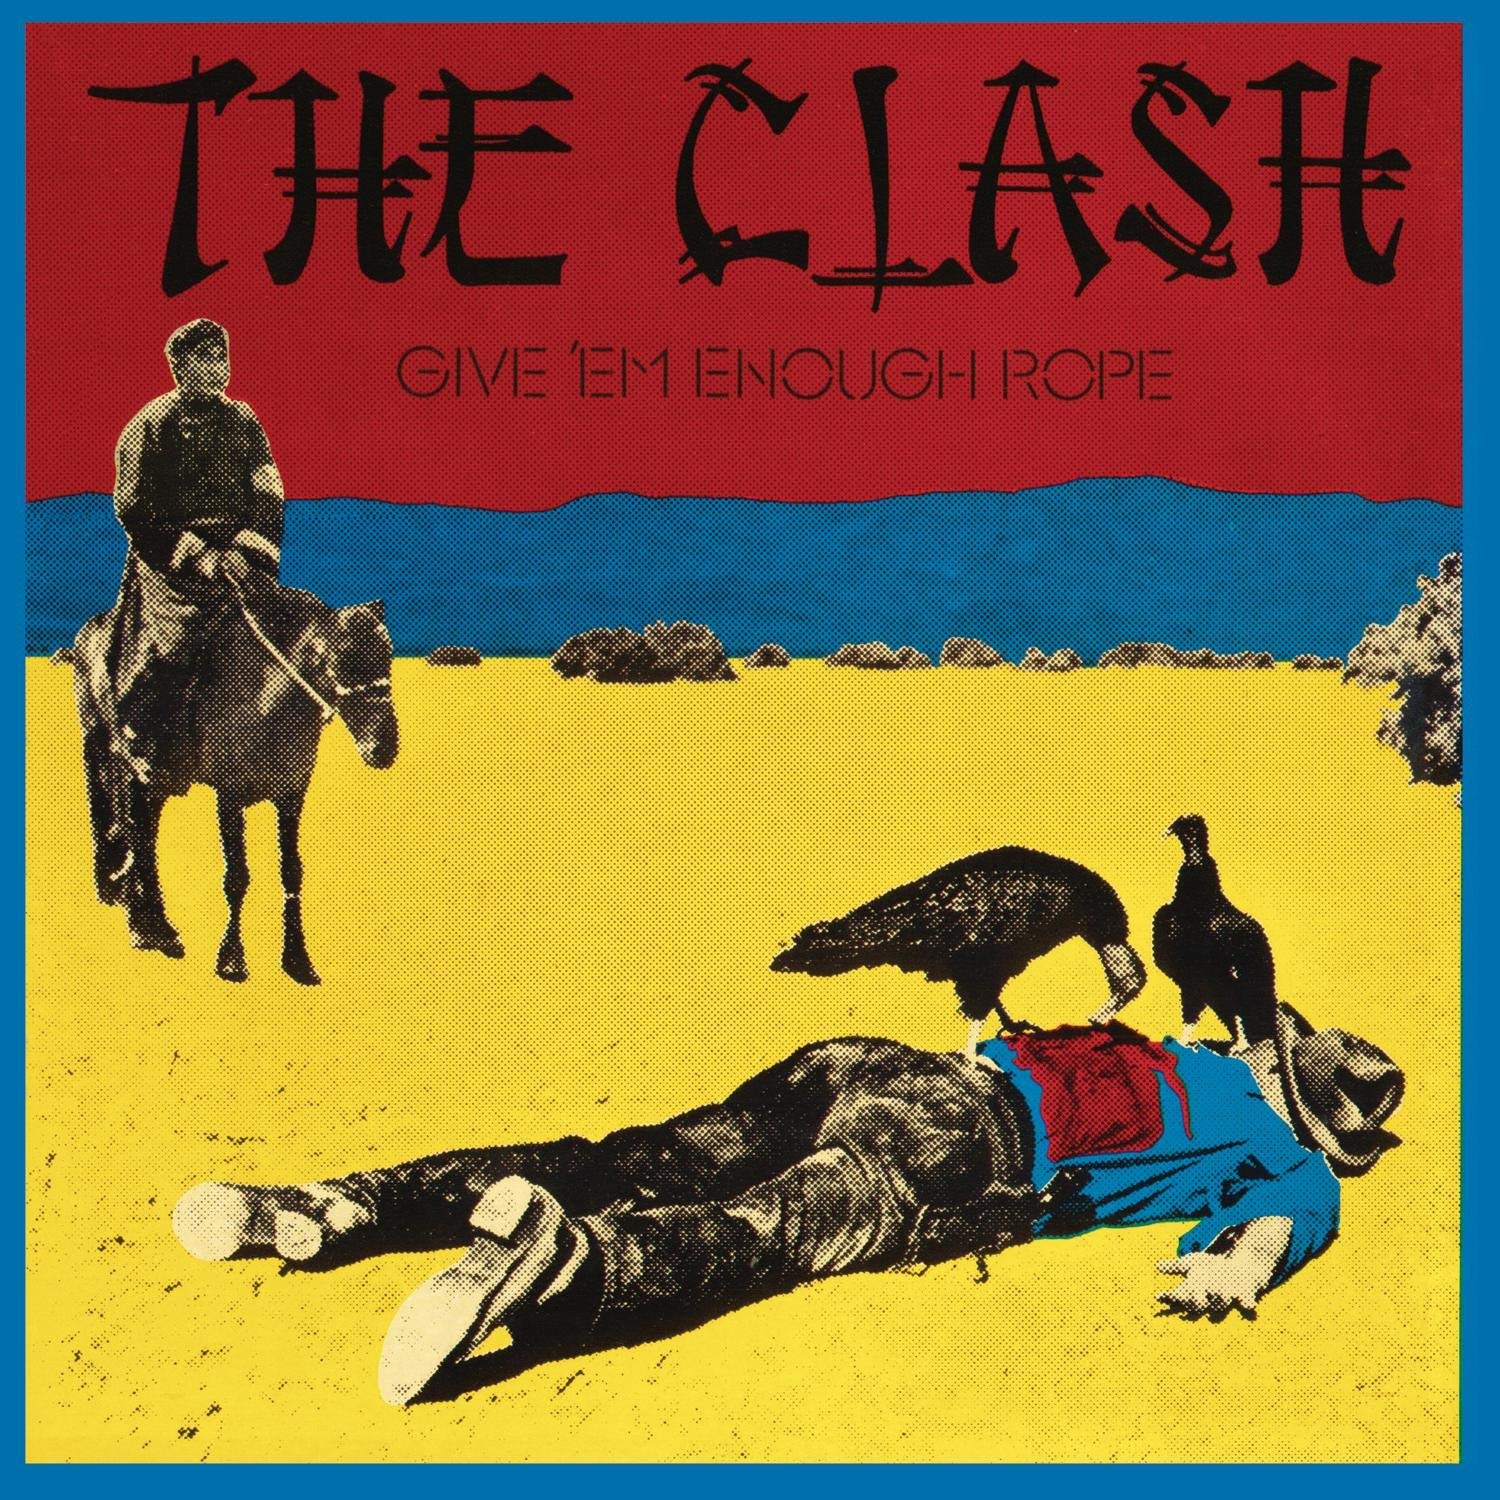  THE CLASH - GIVE THEM ENOUGH ROPE $25 fully remastered 180 gram vinyl @ 1978 Epic Records 